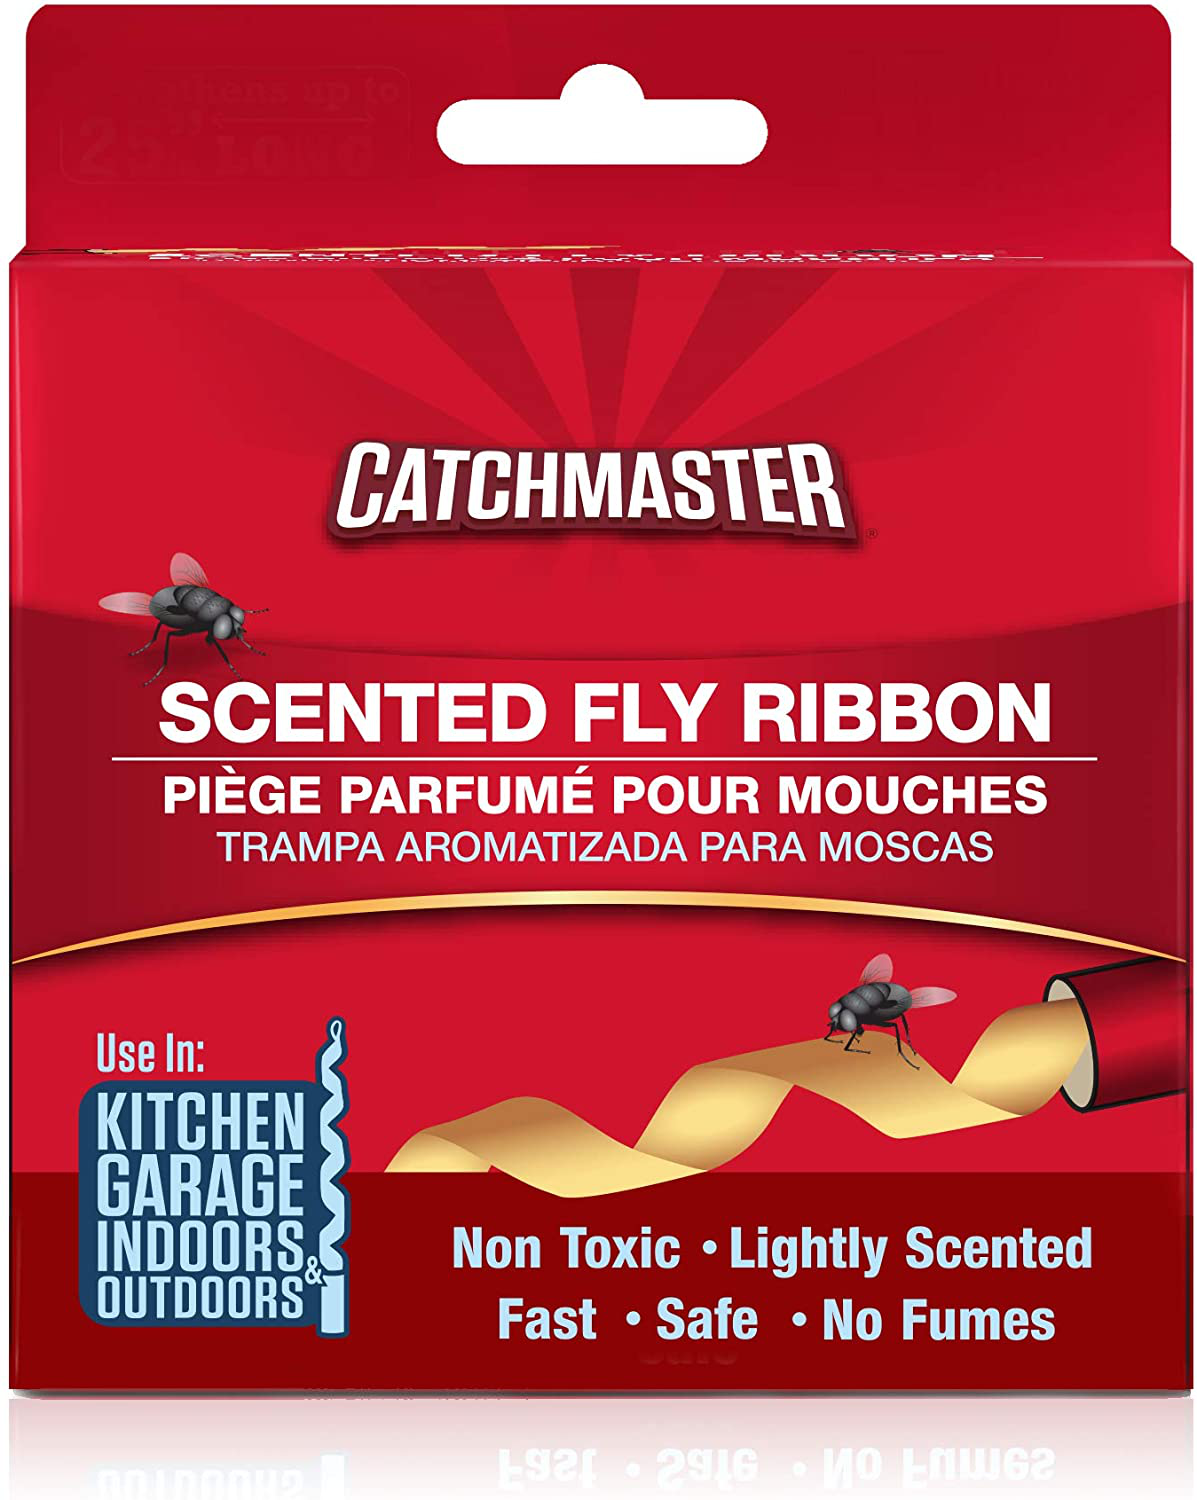 Catchmaster Sticky Fly Trap Ribbon - Indoor/Outdoor Fly Catcher Insect Killer- Pack of 20 Rolls